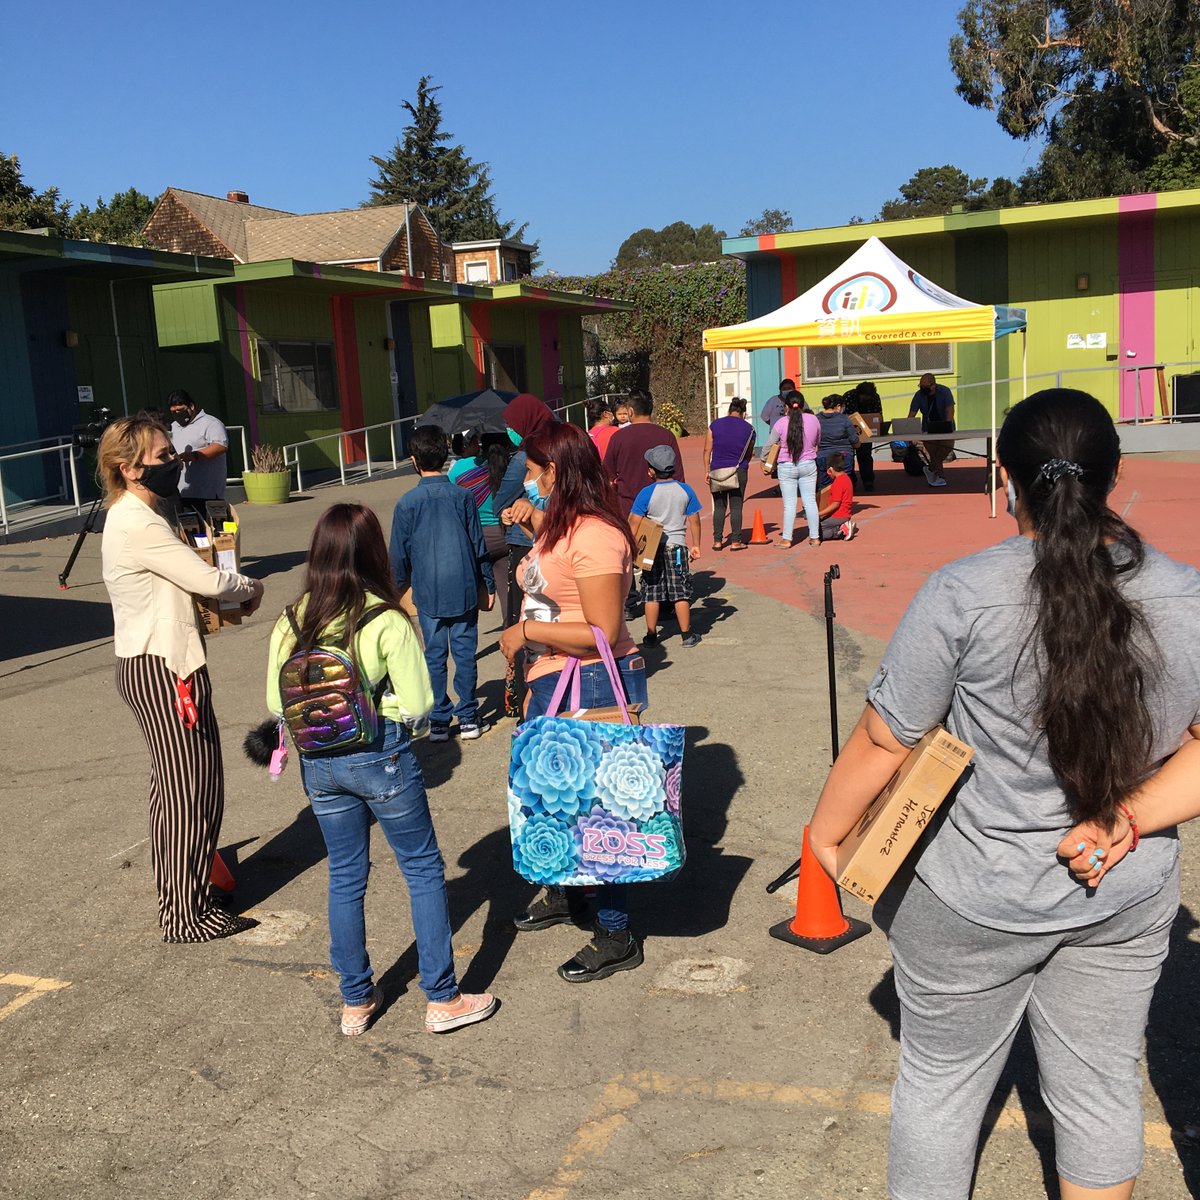 Keta represented for The Oakland REACH at the #OaklandUndivided event at @EFCPS Achieve Academy, where they passed out 200 laptops to families. Keta is co-chair of this campaign, bringing parent leadership to community efforts to close the digital divide. @OaklandEdFund